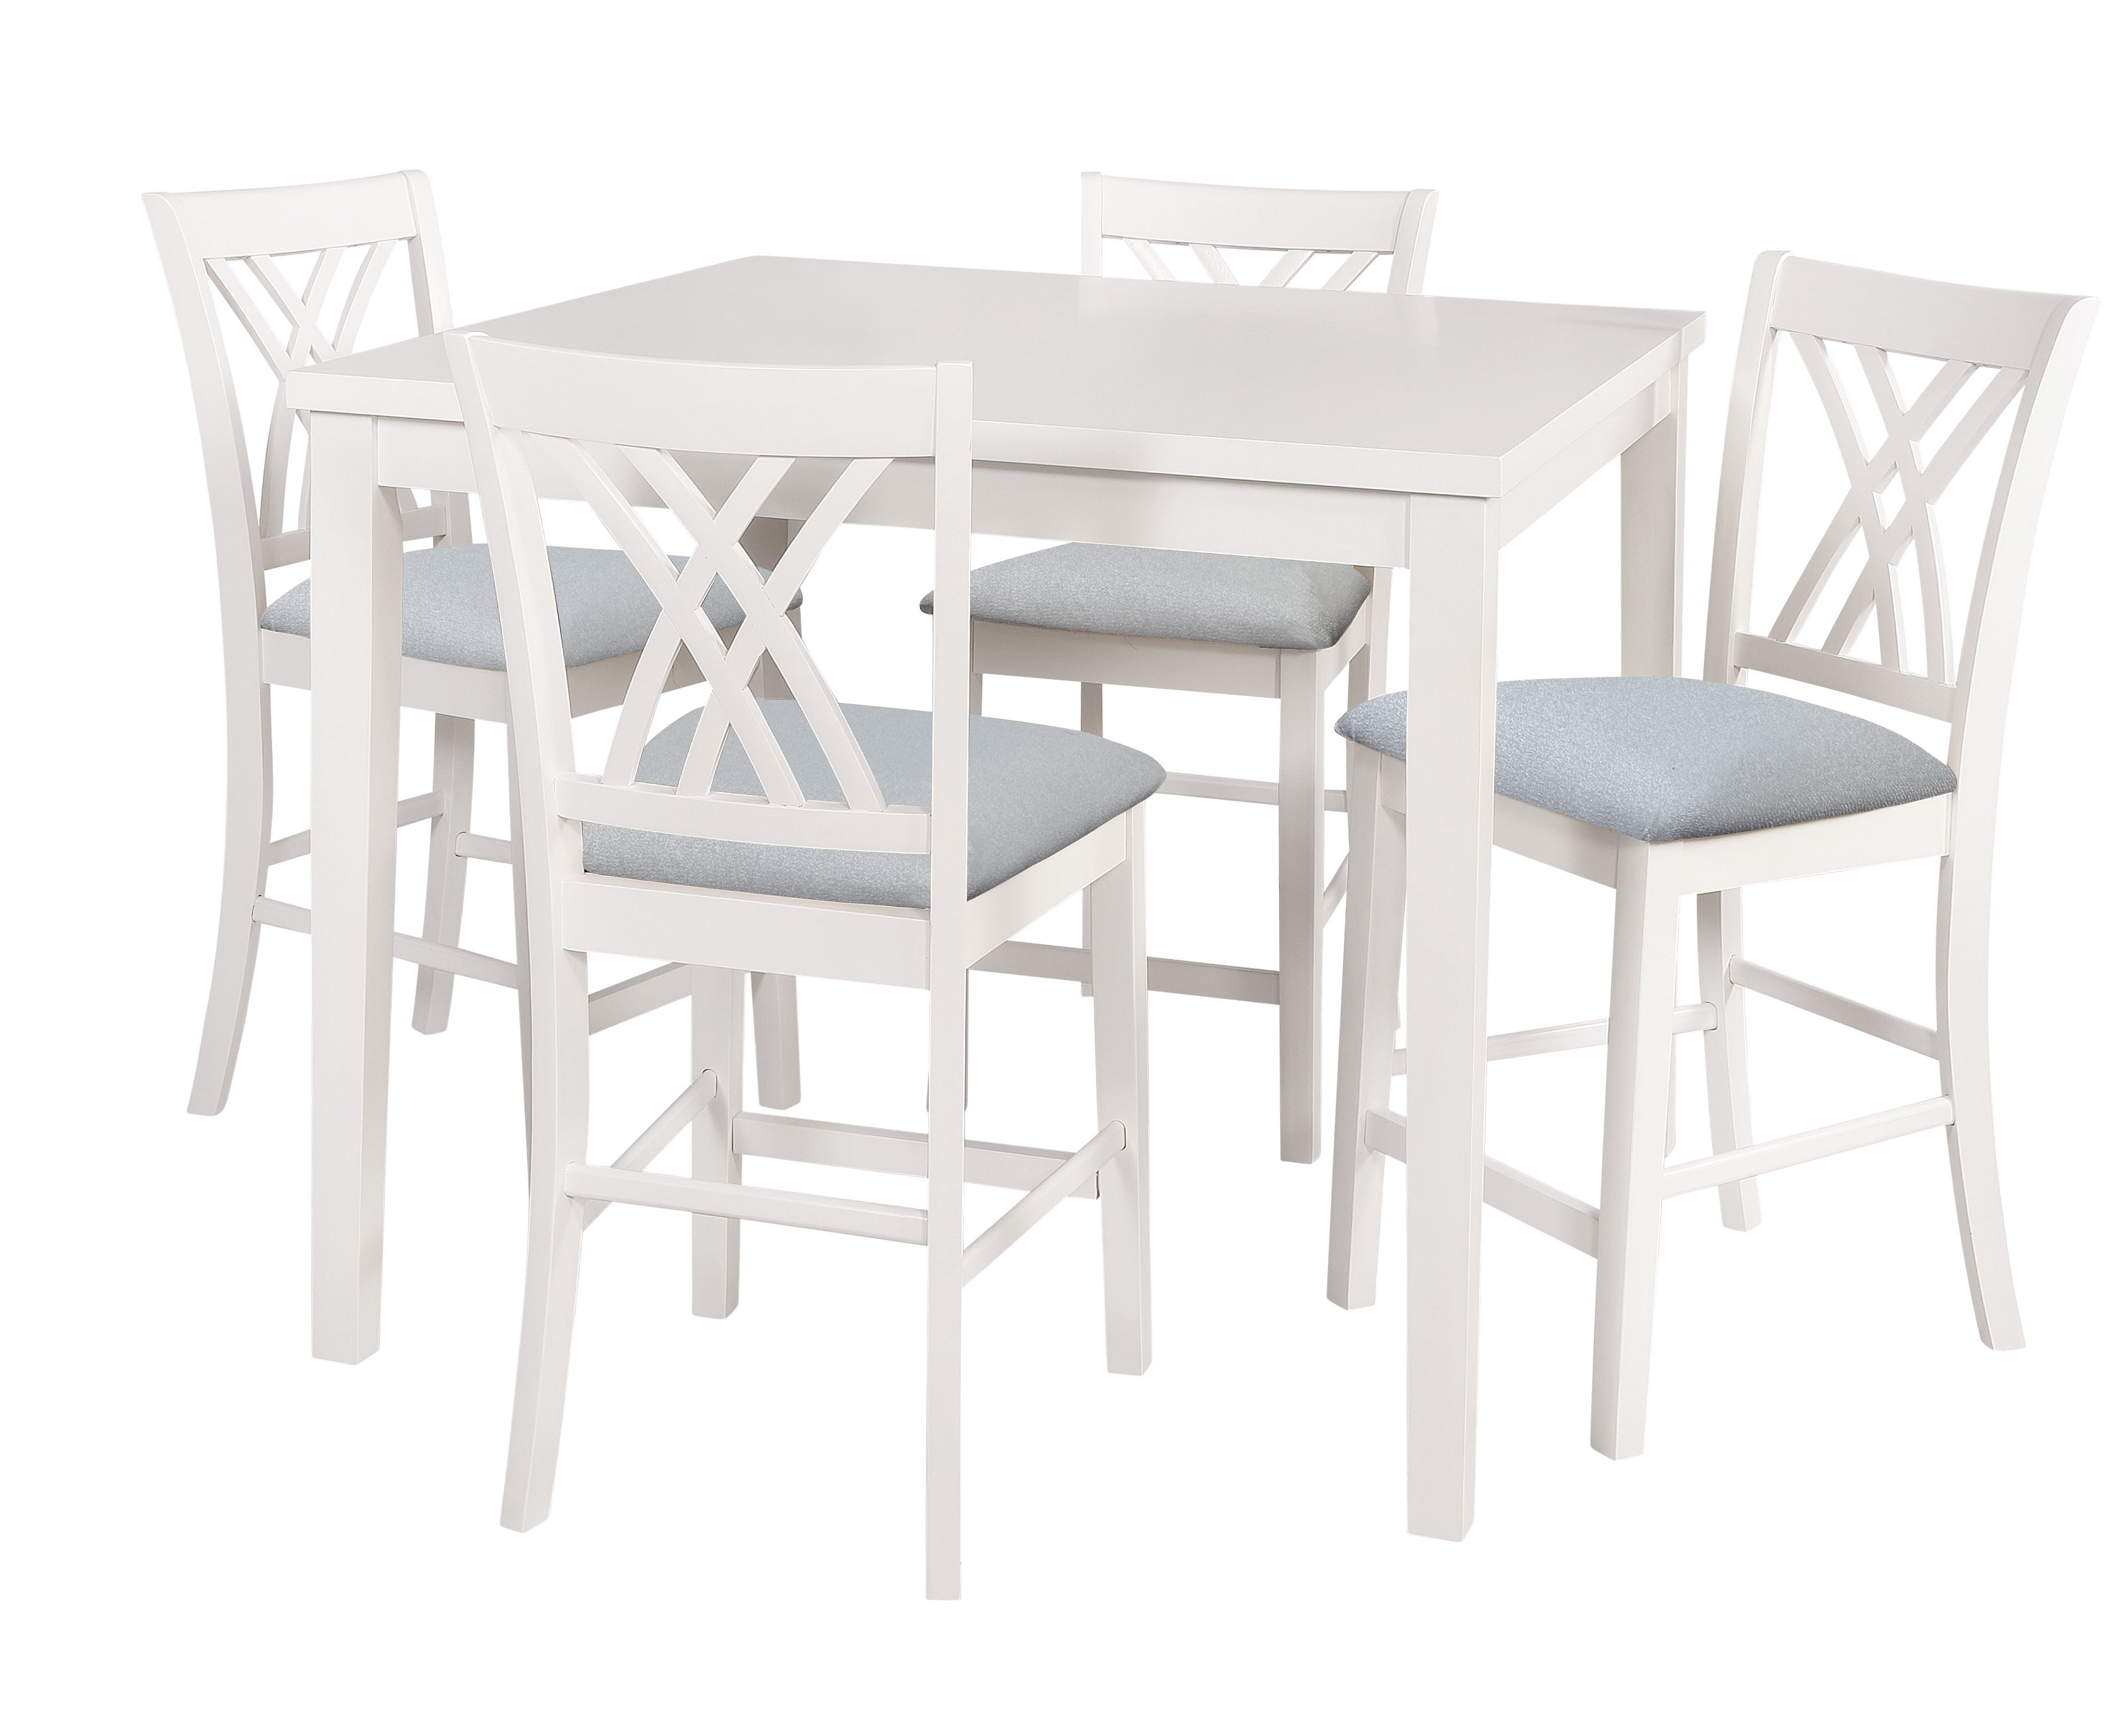 5 Piece Breakfast Nook Dining Sets Regarding Most Current Highland Dunes Gisella 5 Piece Breakfast Nook Dining Set & Reviews (Photo 3 of 25)